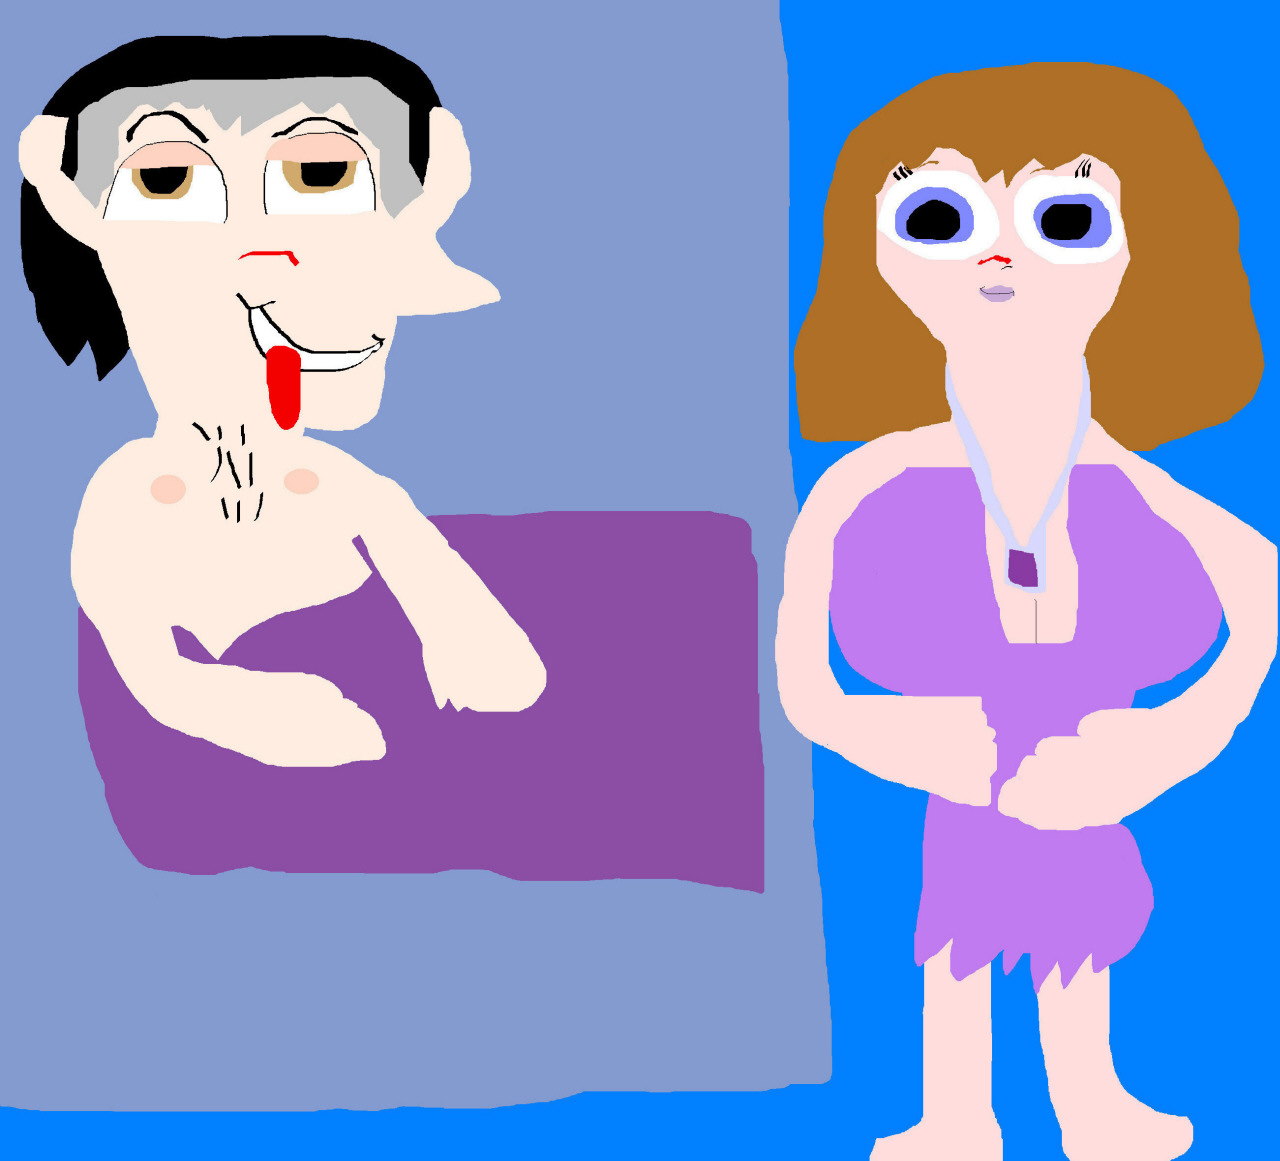 Cedric Is Ready For Sofia To Join Him In Bed MS Paint by Falconlobo